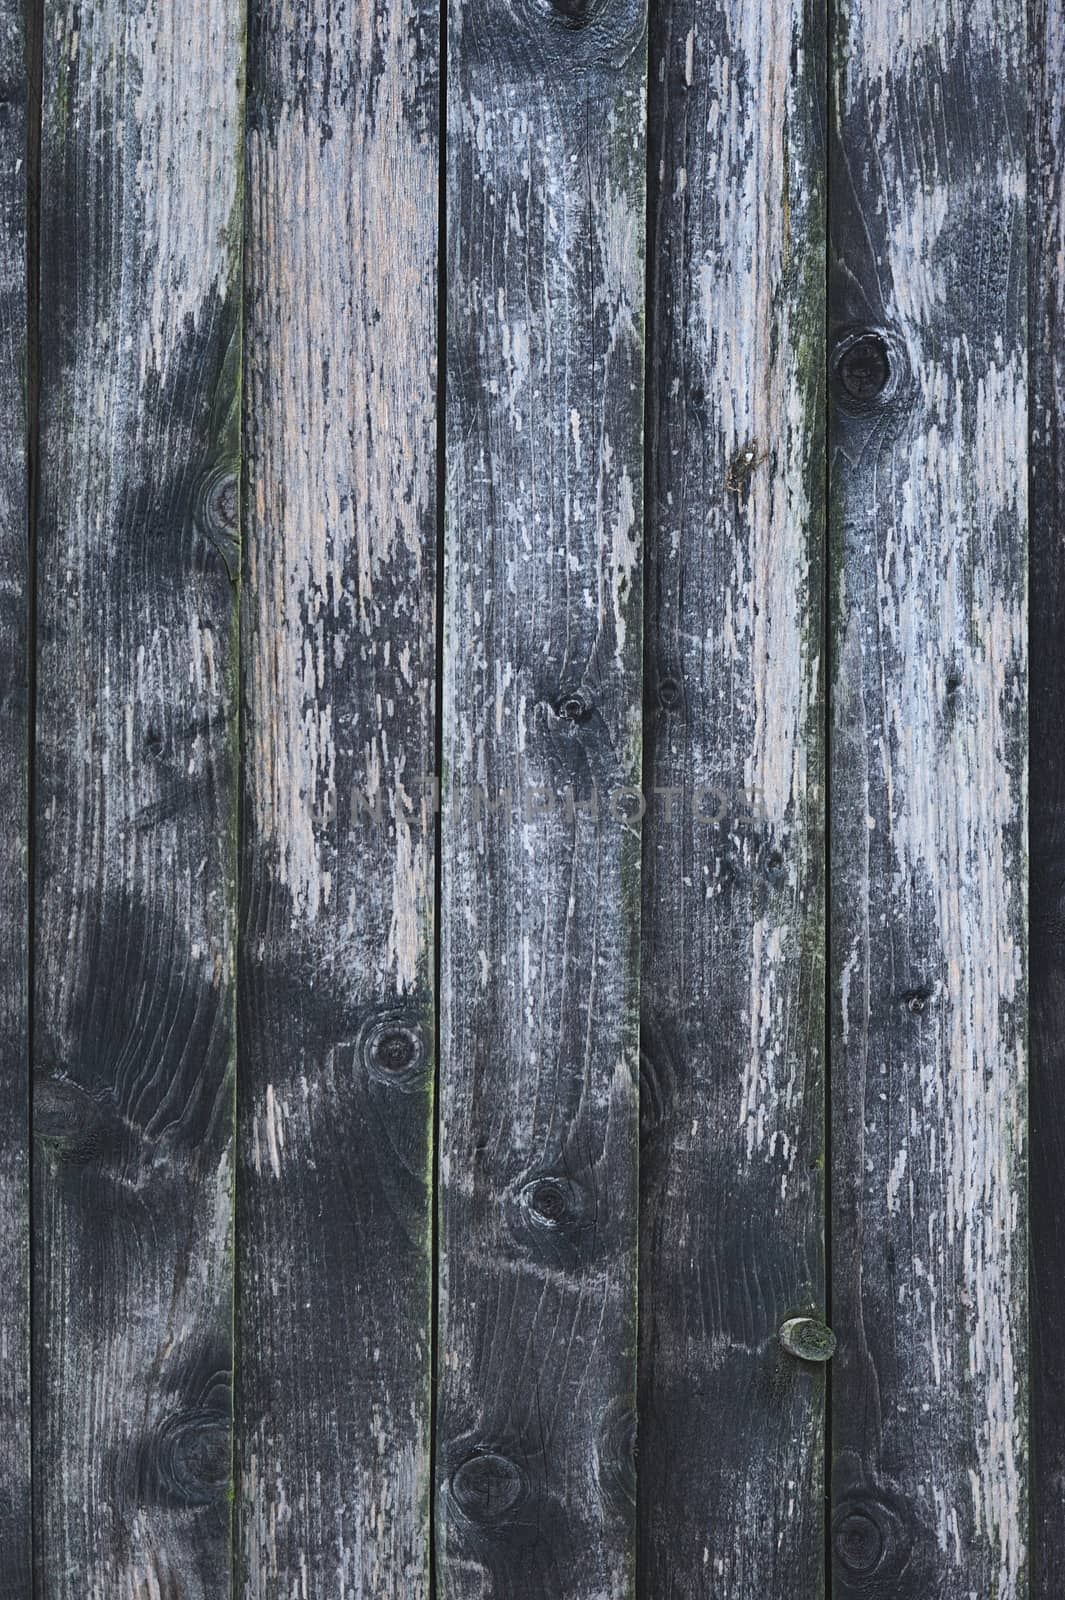 Texture of grey and green plank wood